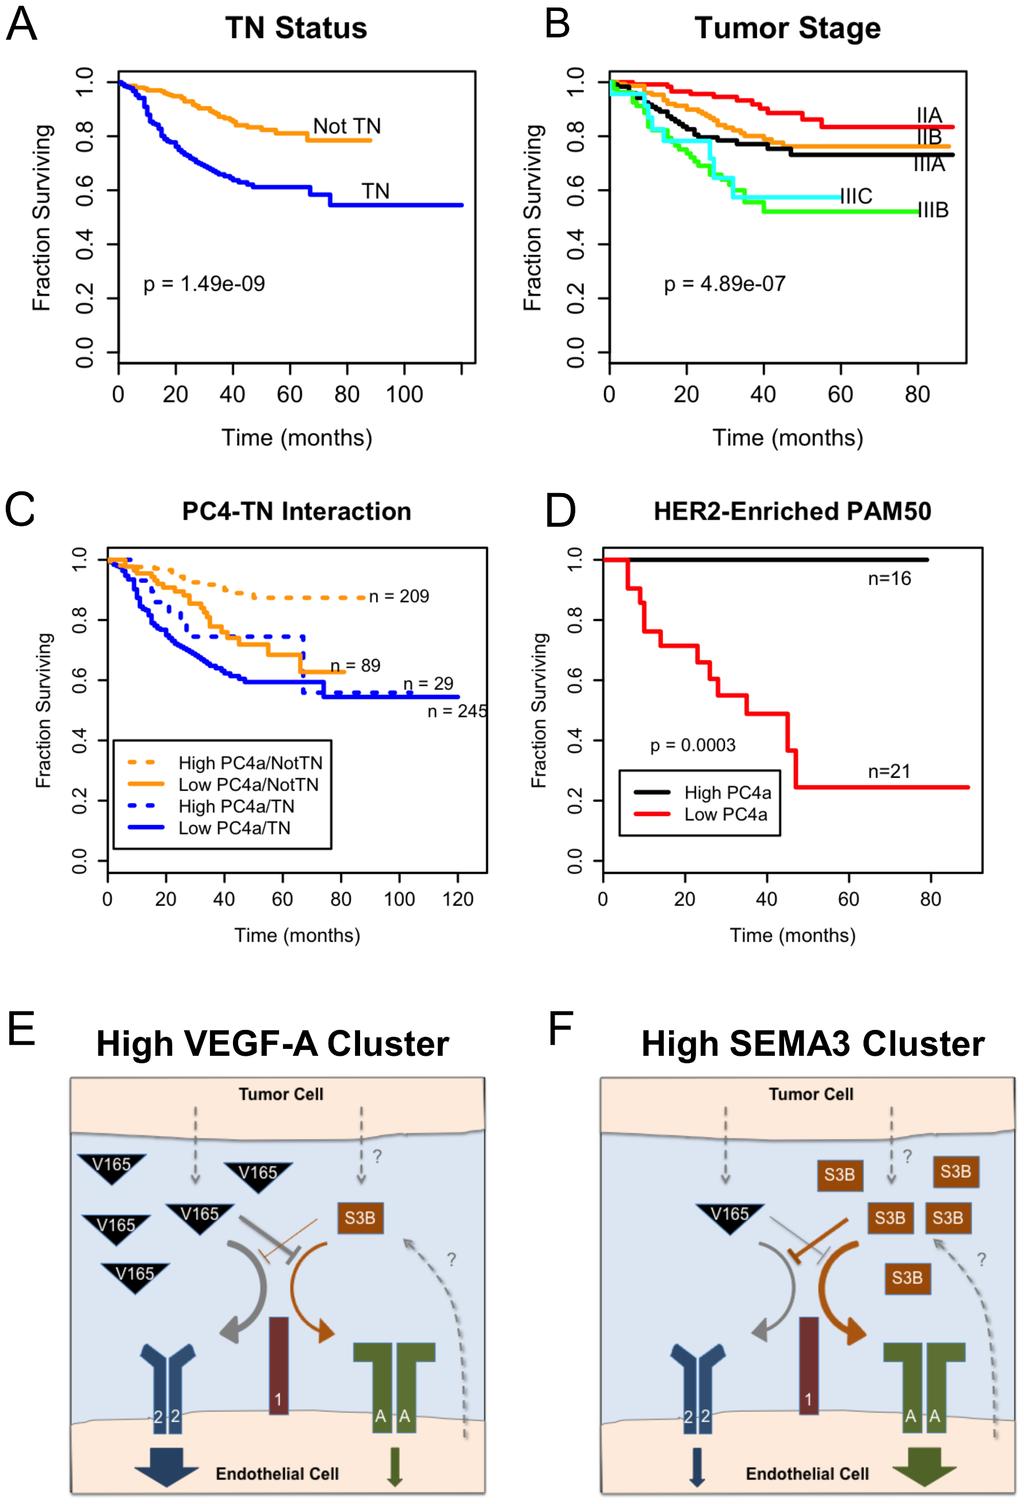 Figure 7. Angiogenesis gene expression subgroups correlate with survival. A D, Survival curves for tumor samples that had available survival data. A log-rank test was used to determine p-values.